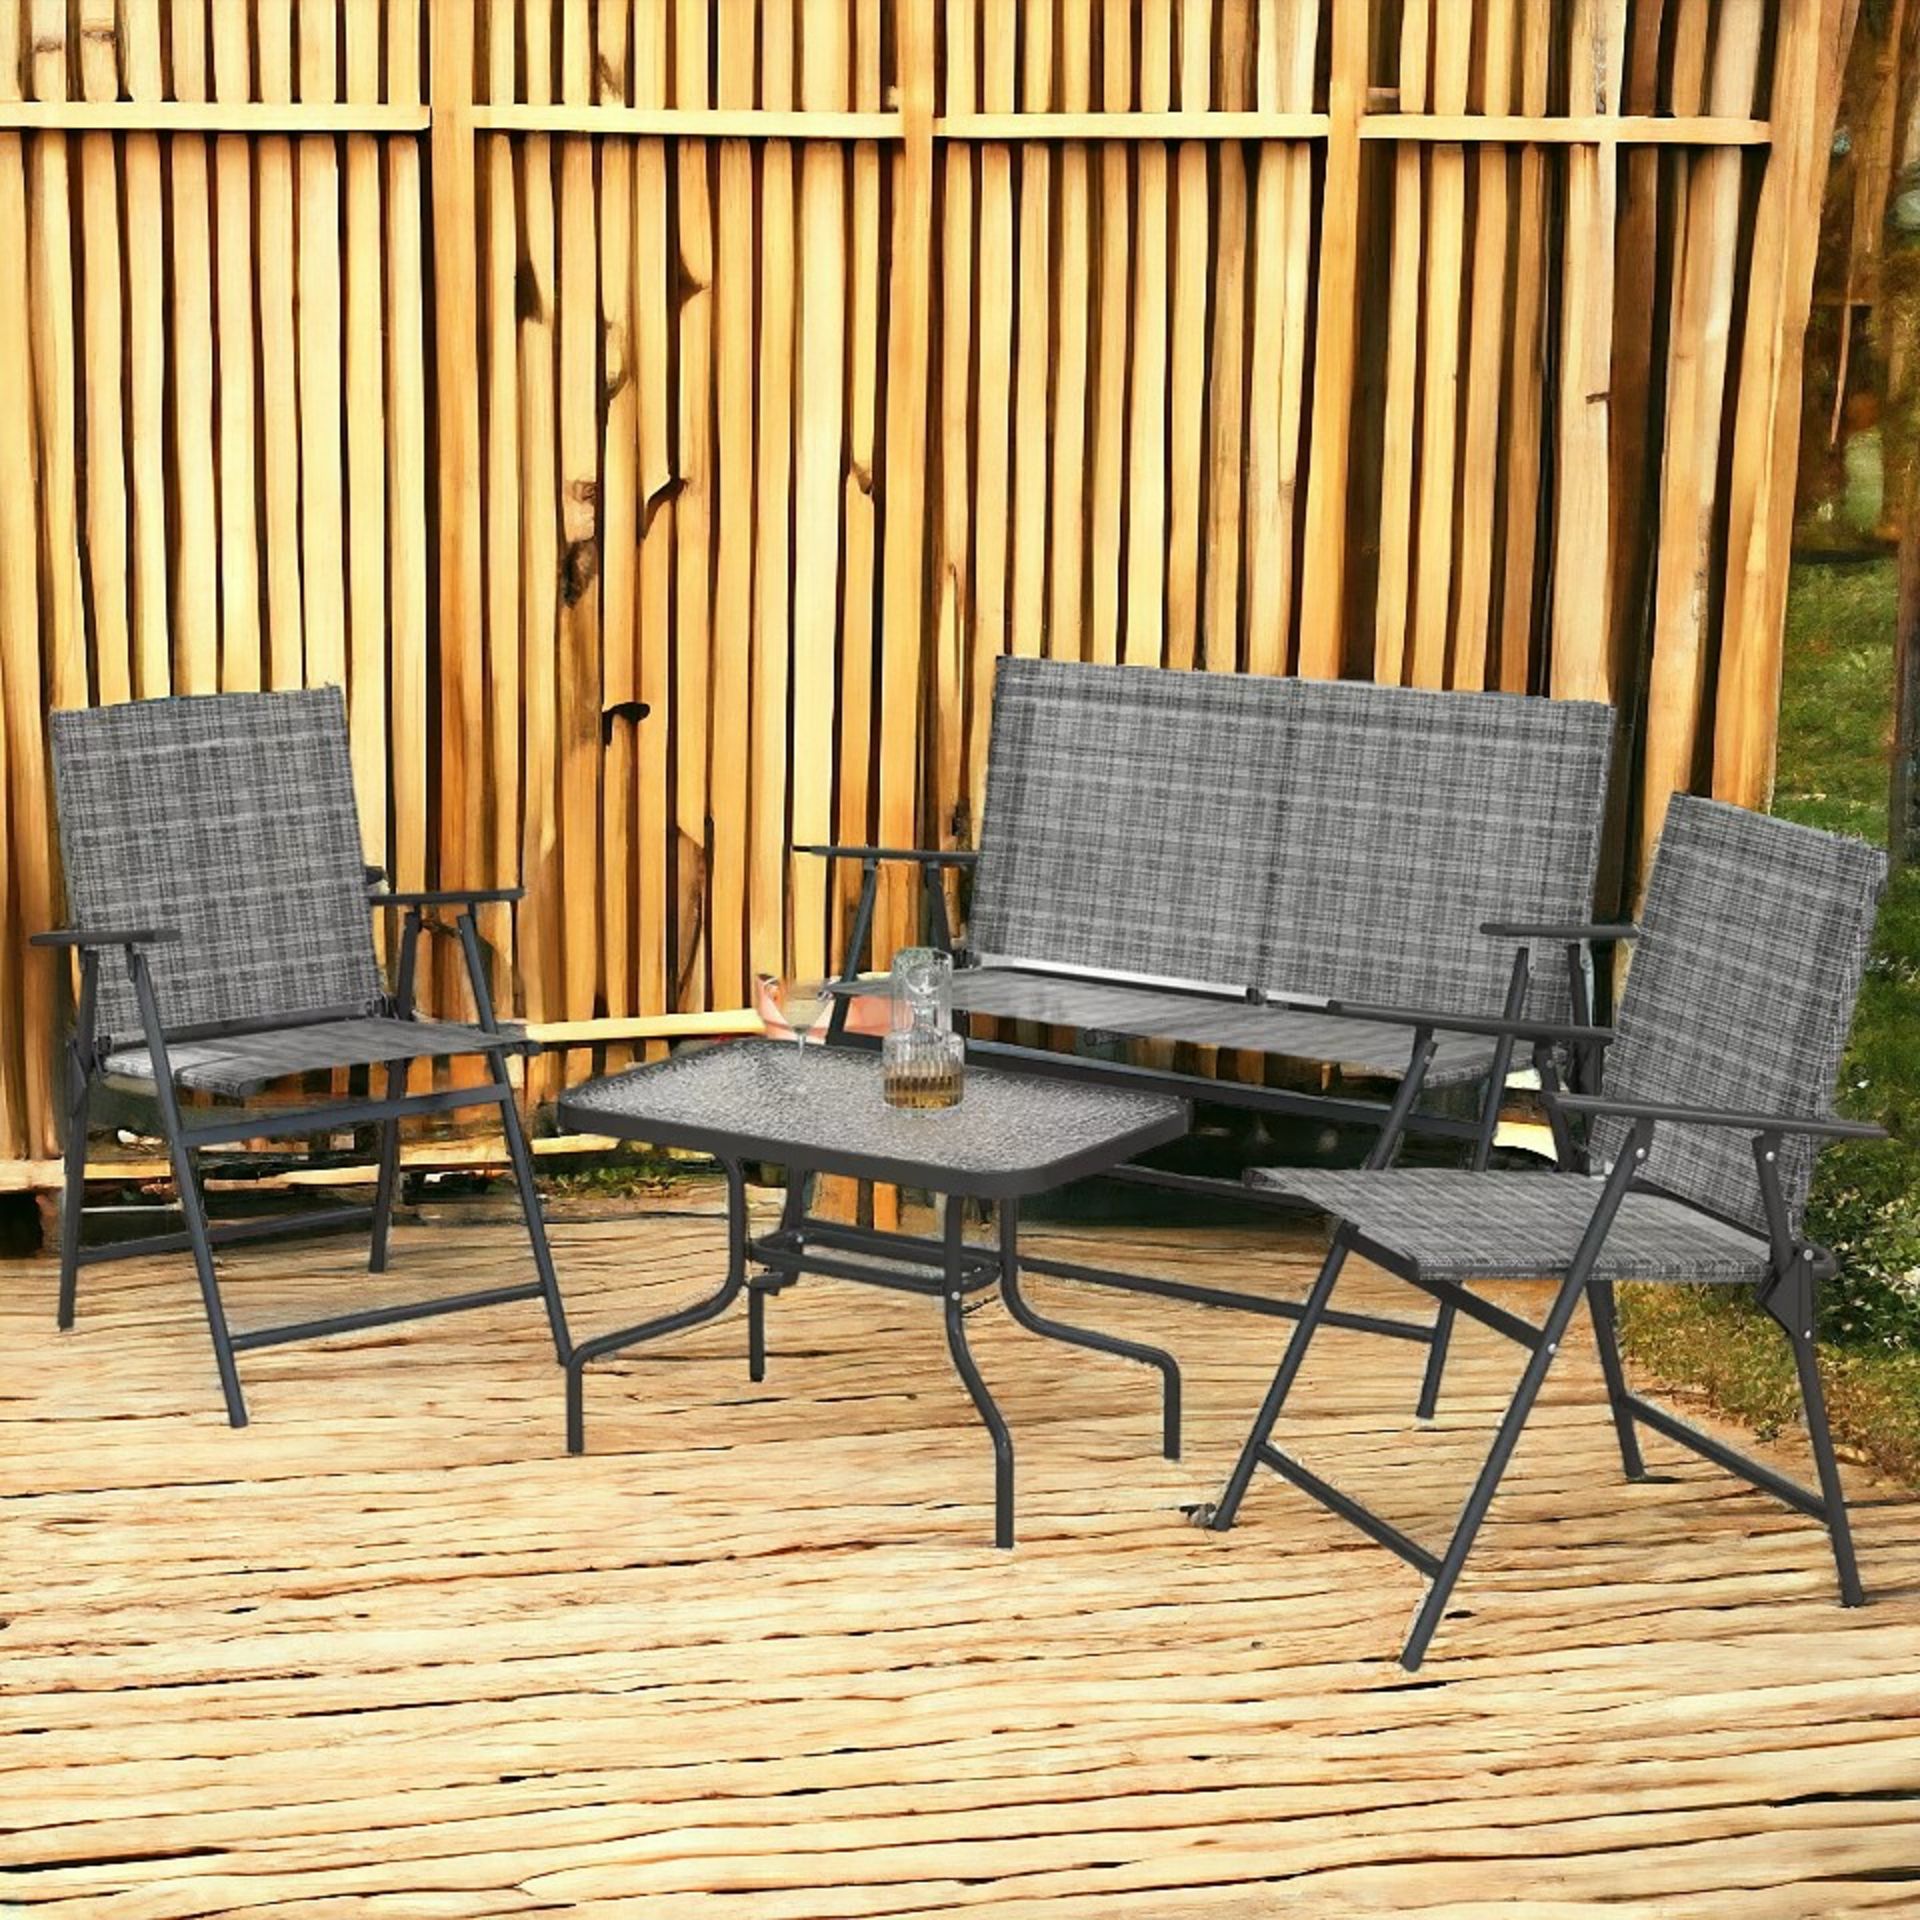 FREE DELIVERY - BRAND NEW PATIO FURNITURE SET, GARDEN SET W/ TABLE, FOLDABLE CHAIRS, A LOVESEAT - Bild 2 aus 2